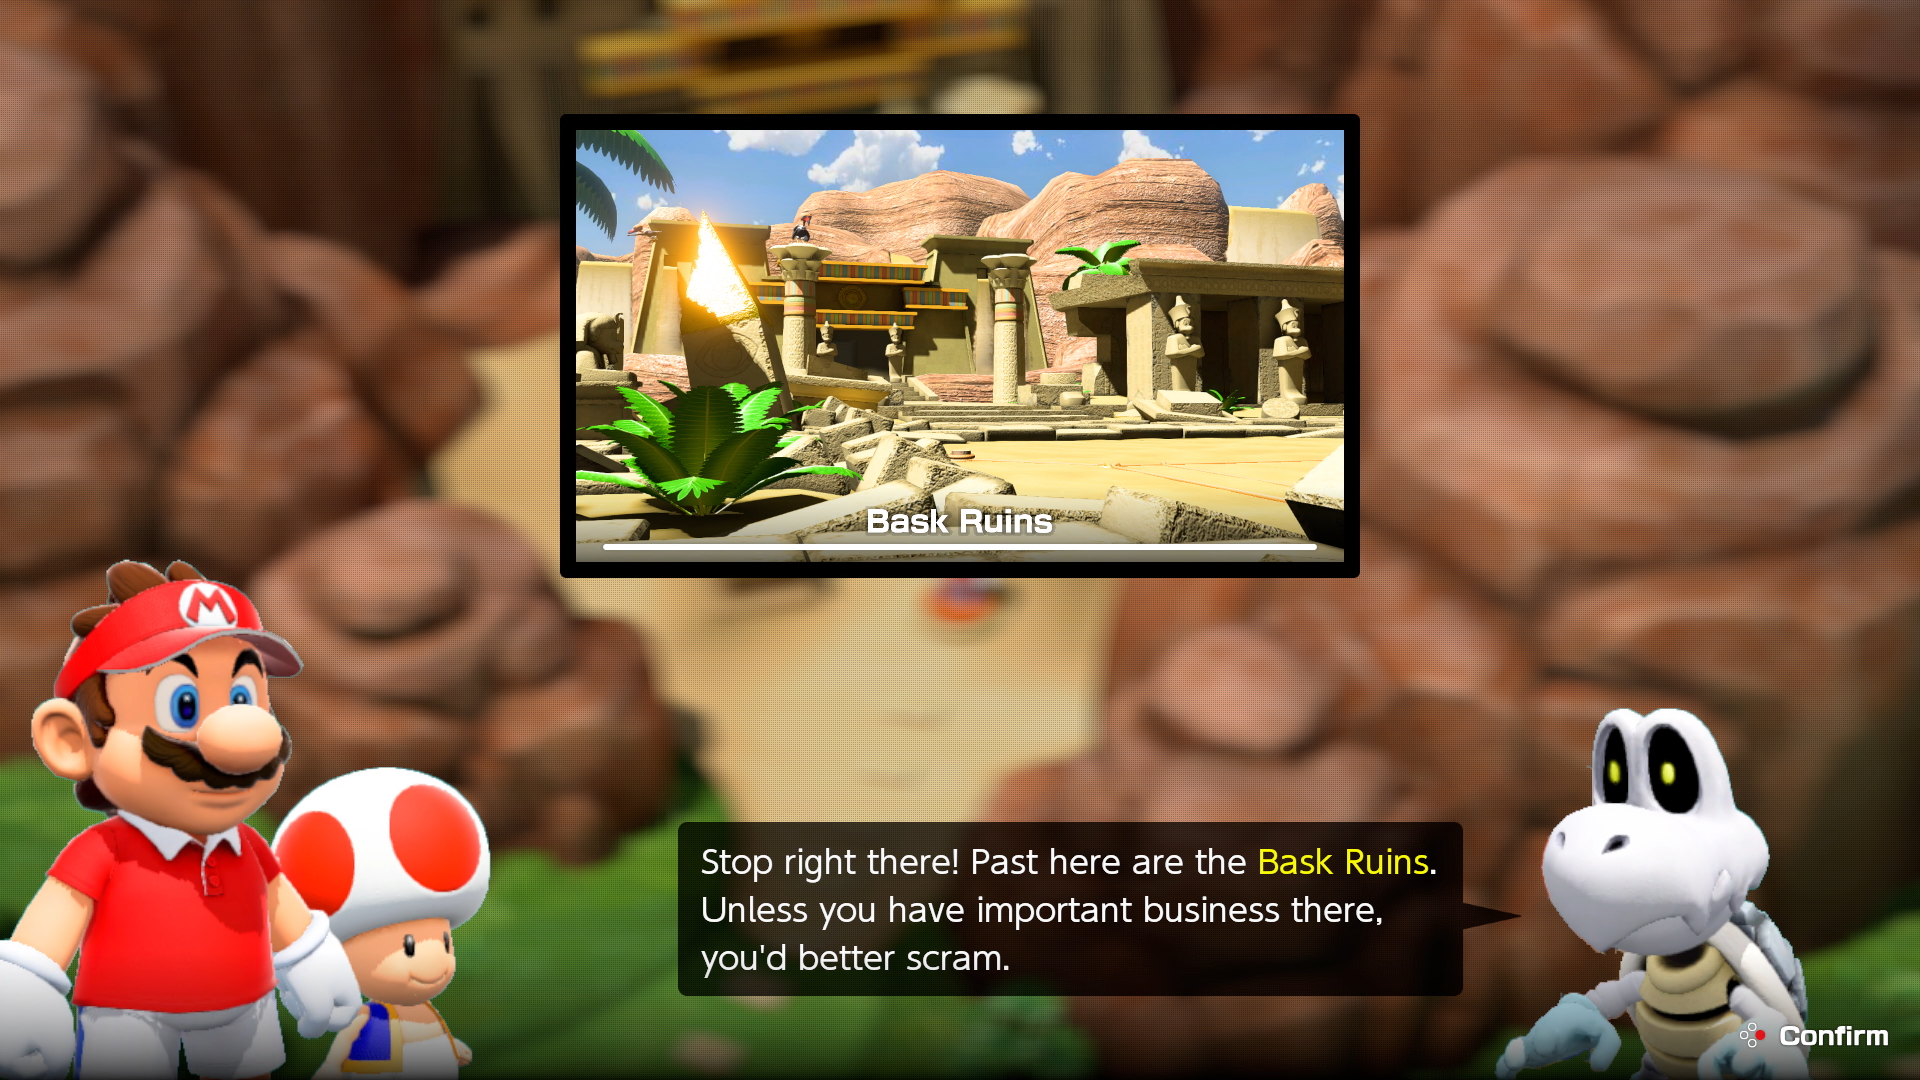 Dry Bones interrupts Mario and Toad by telling them to stop at the Bask Ruins